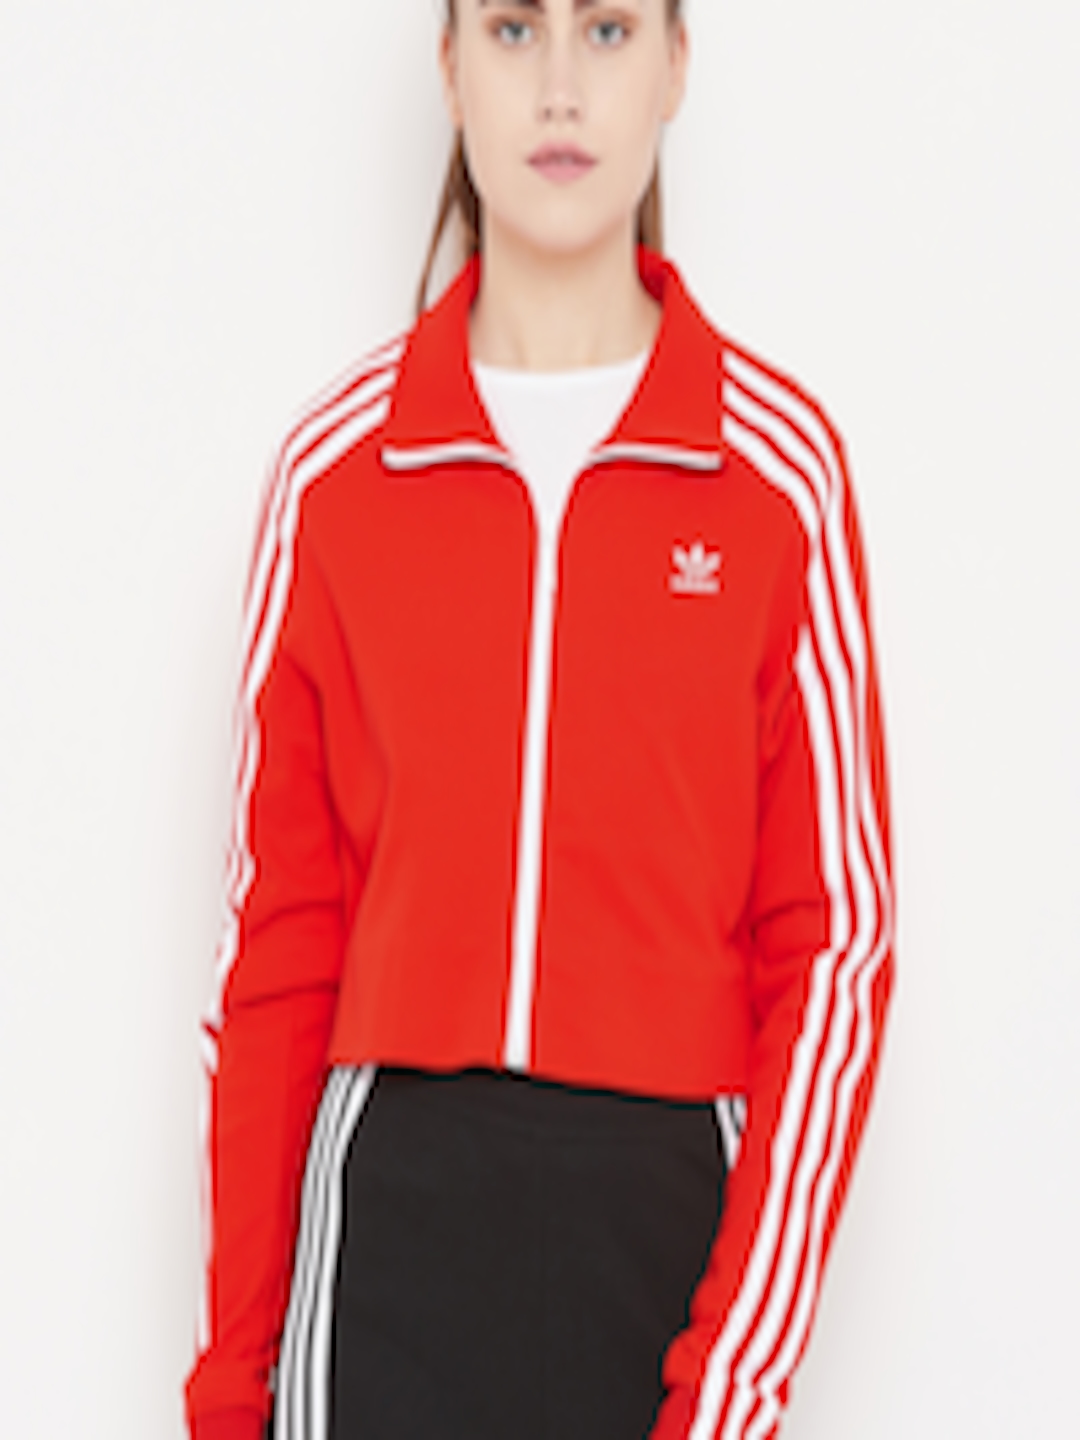 Buy ADIDAS Originals Women Red Solid Track Jacket - Jackets for Women